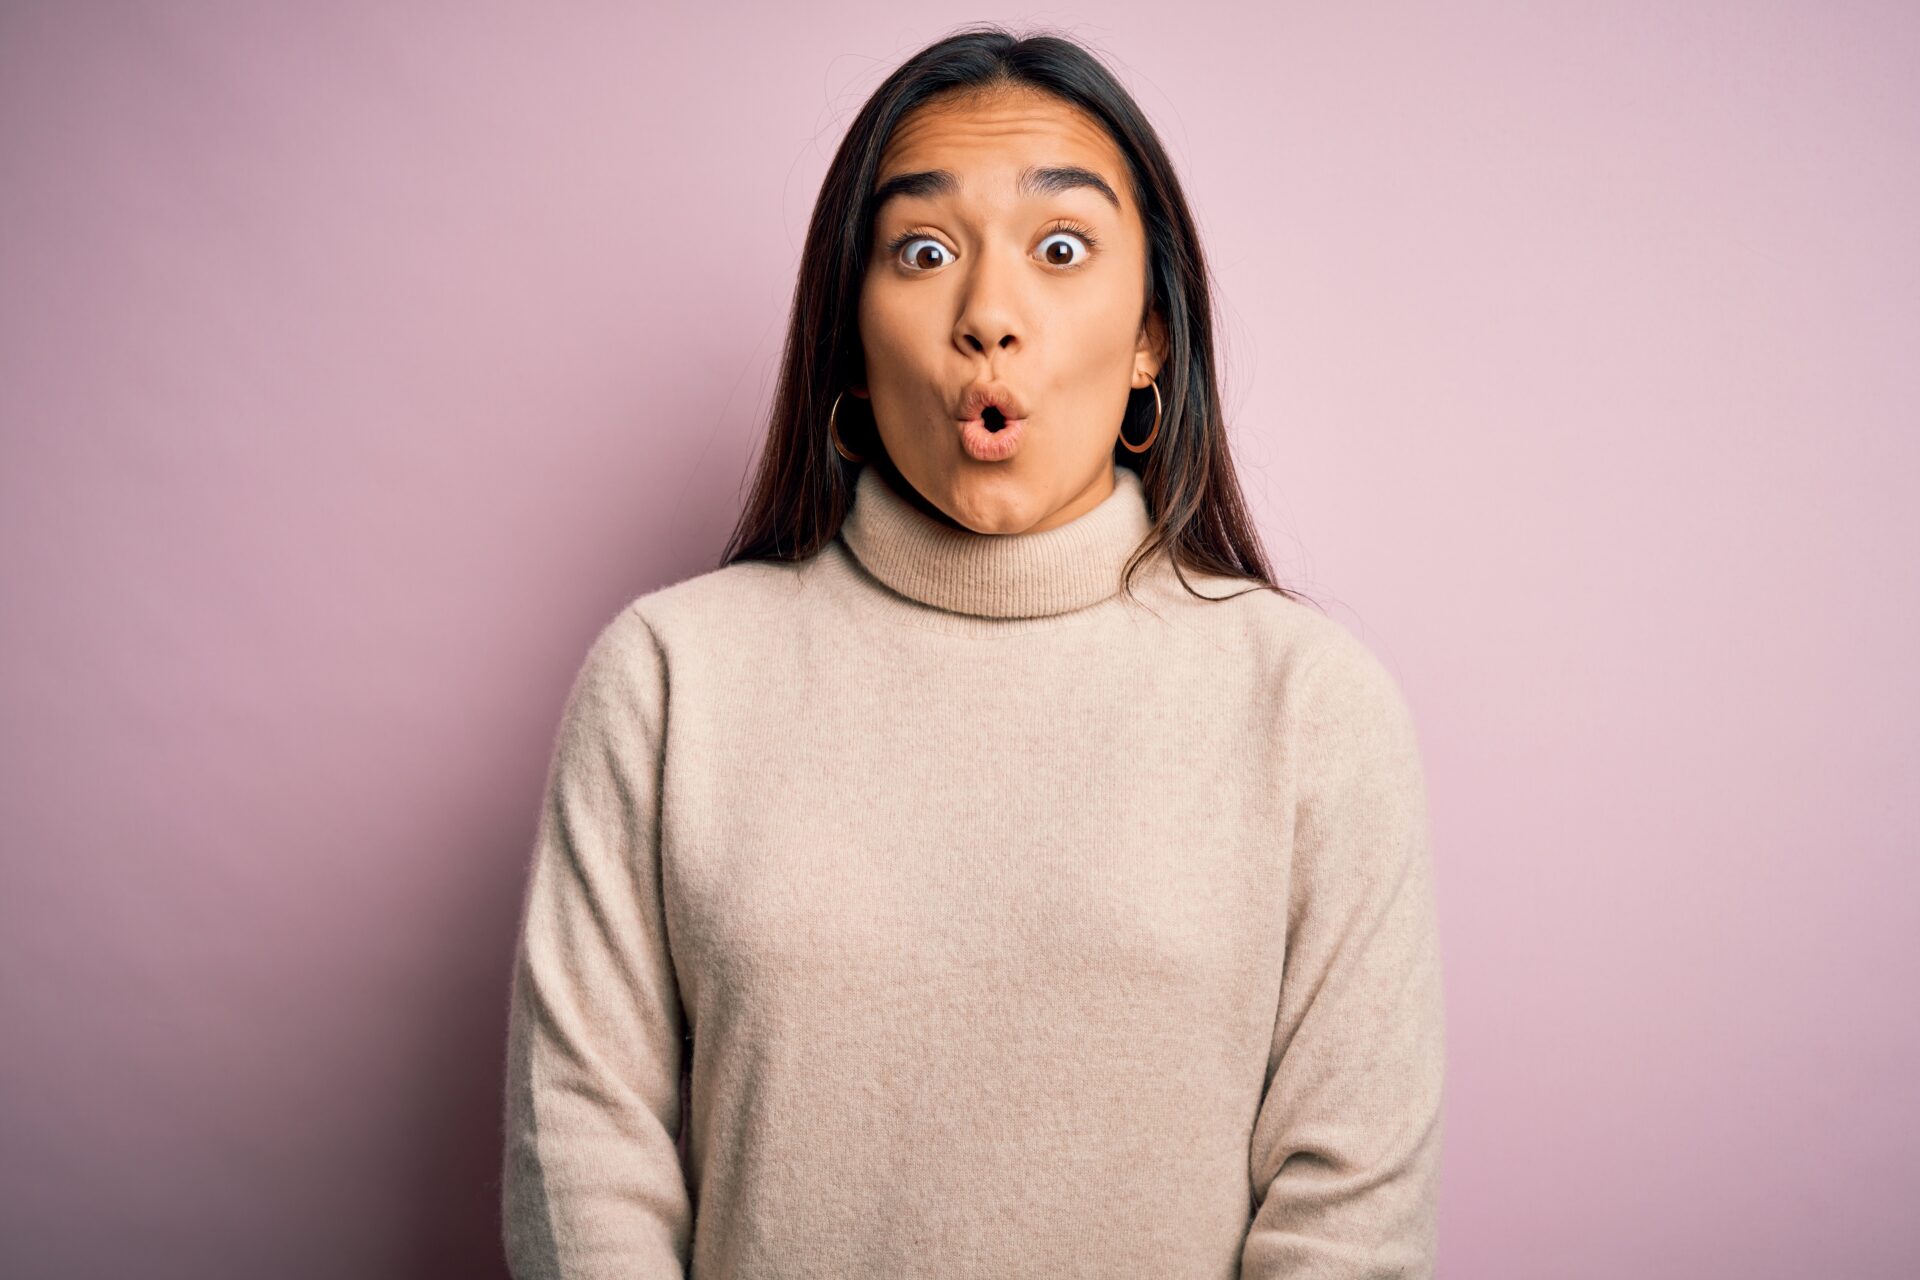 Young beautiful asian woman wearing casual turtleneck sweater over pink background afraid and shocked with surprise expression, fear and excited face.